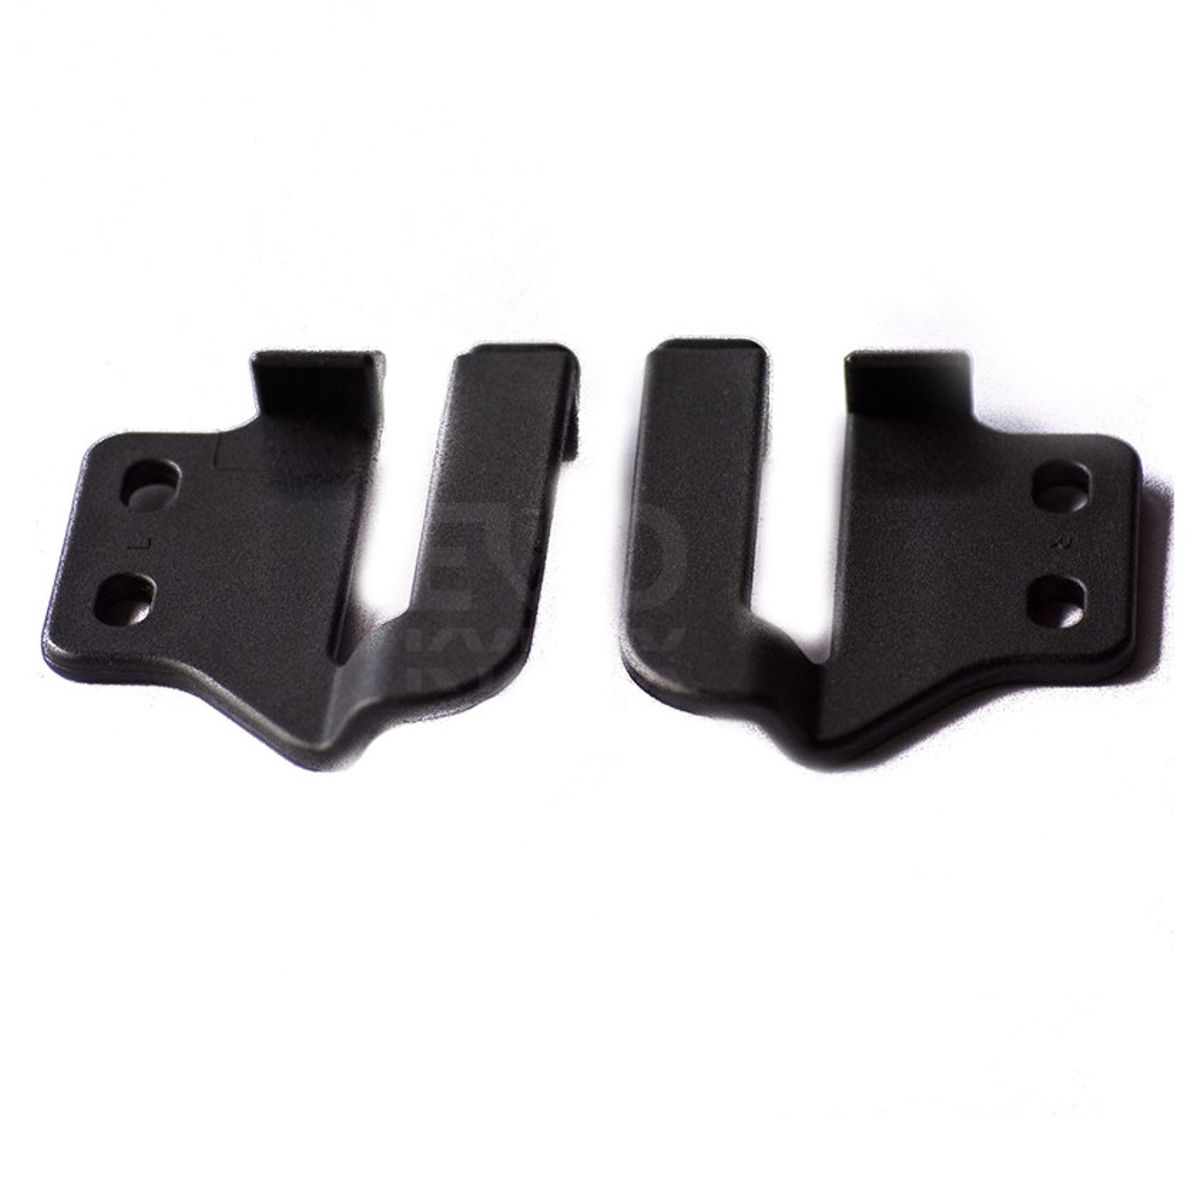 Speedclips for OWB holsters